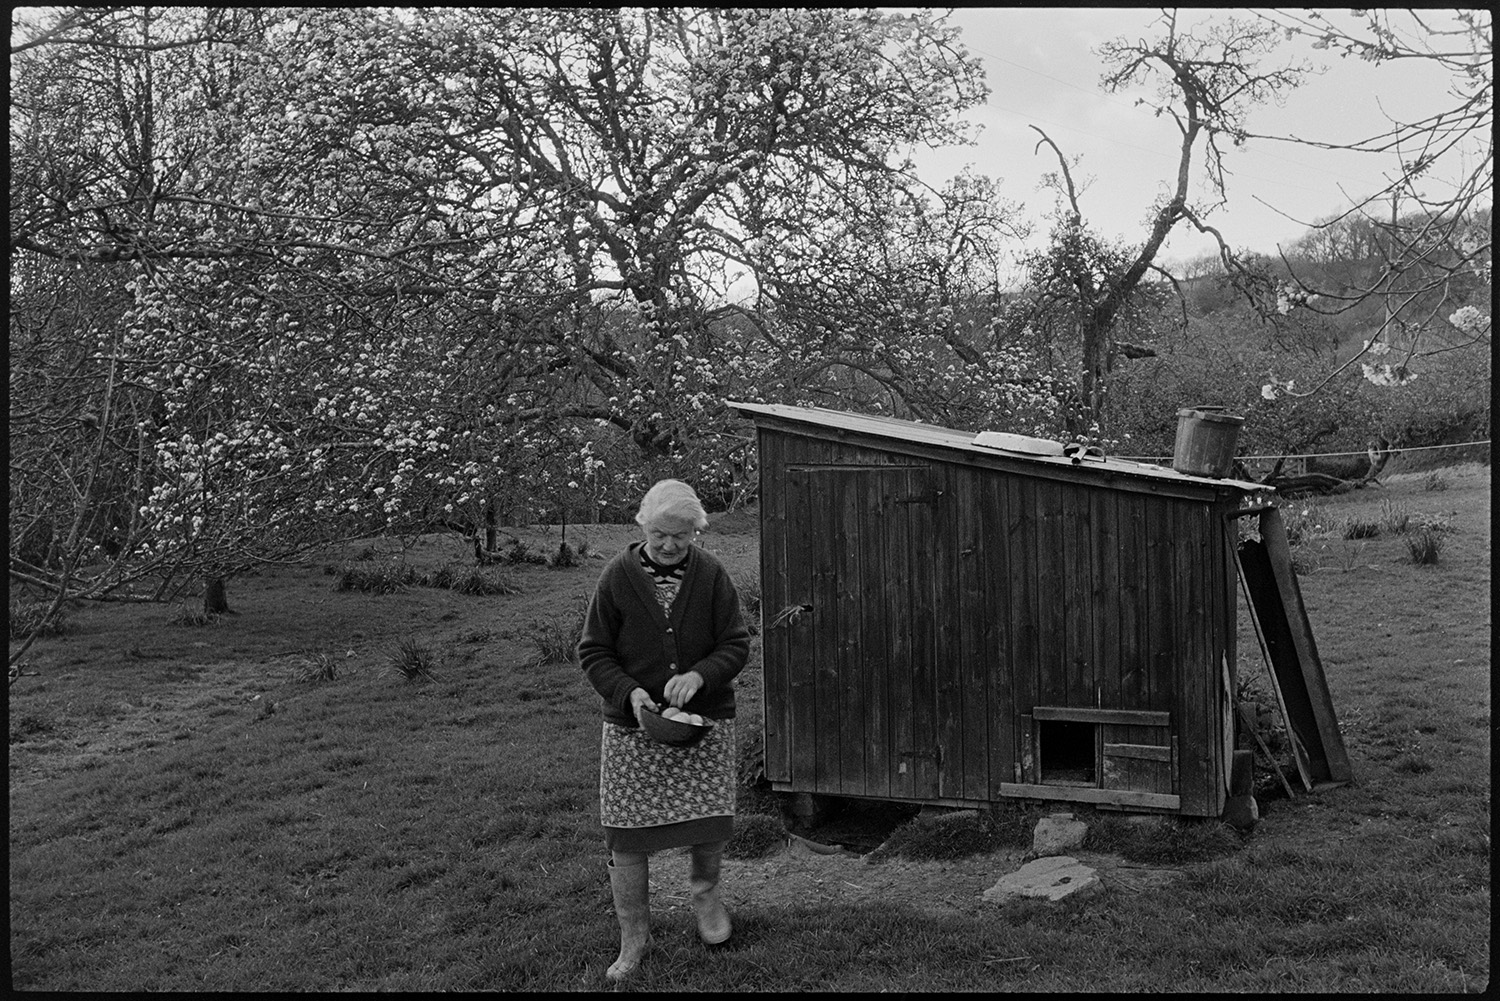 Farm orchard with sheep and chickens, poultry house.
[A woman collecting eggs from a wooden poultry house in an orchard with blossoming trees at Harford, Landkey.]